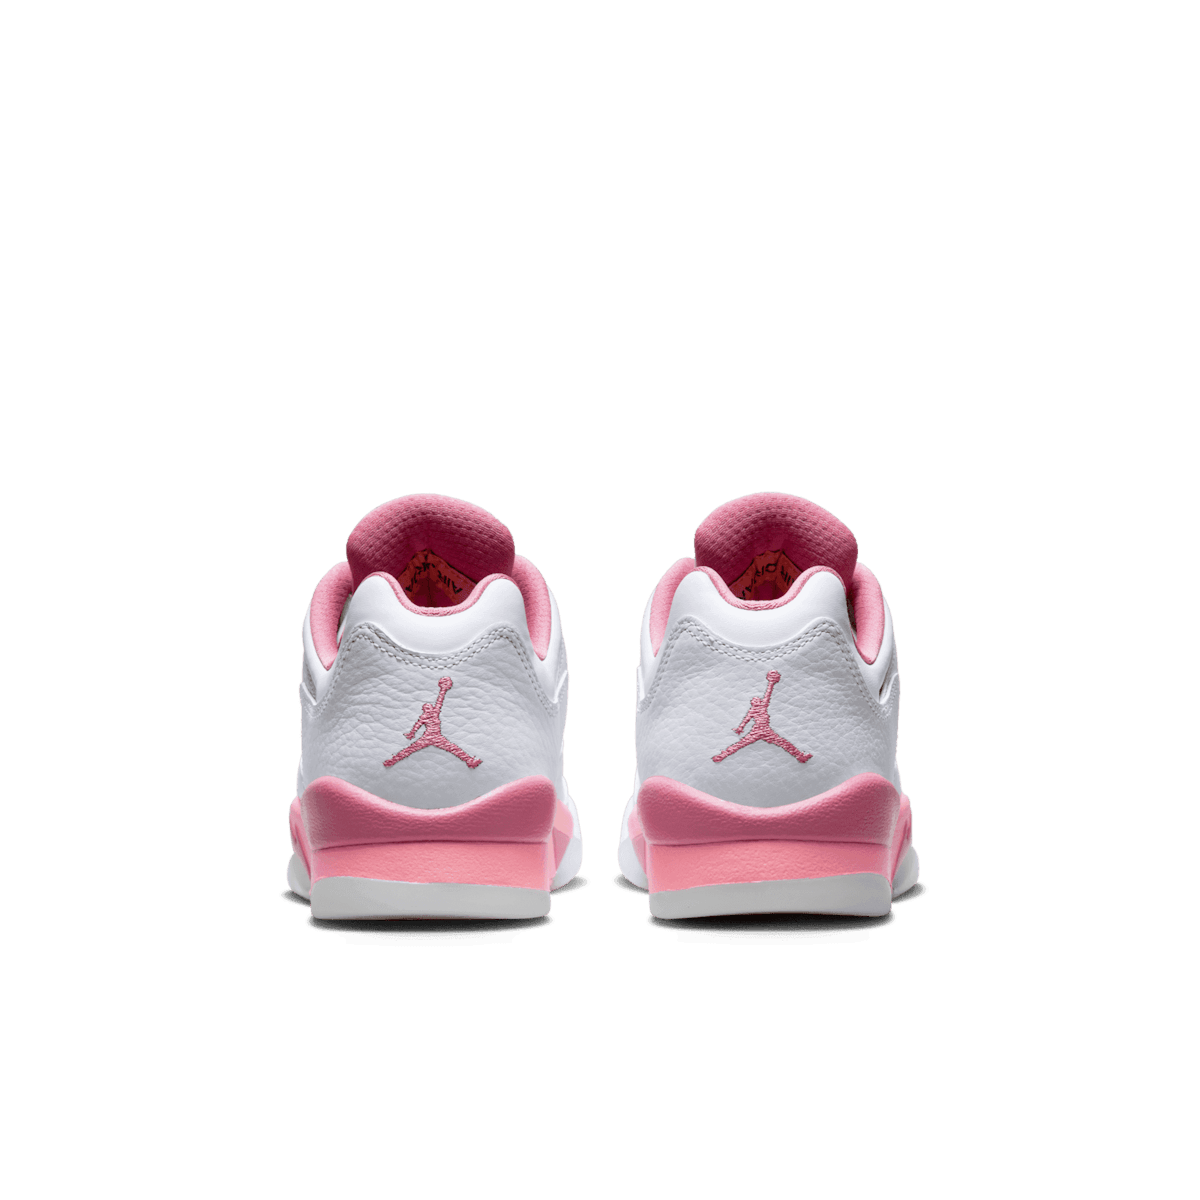 Air Jordan 5 Retro Low Crafted For Her (GS) Angle 3